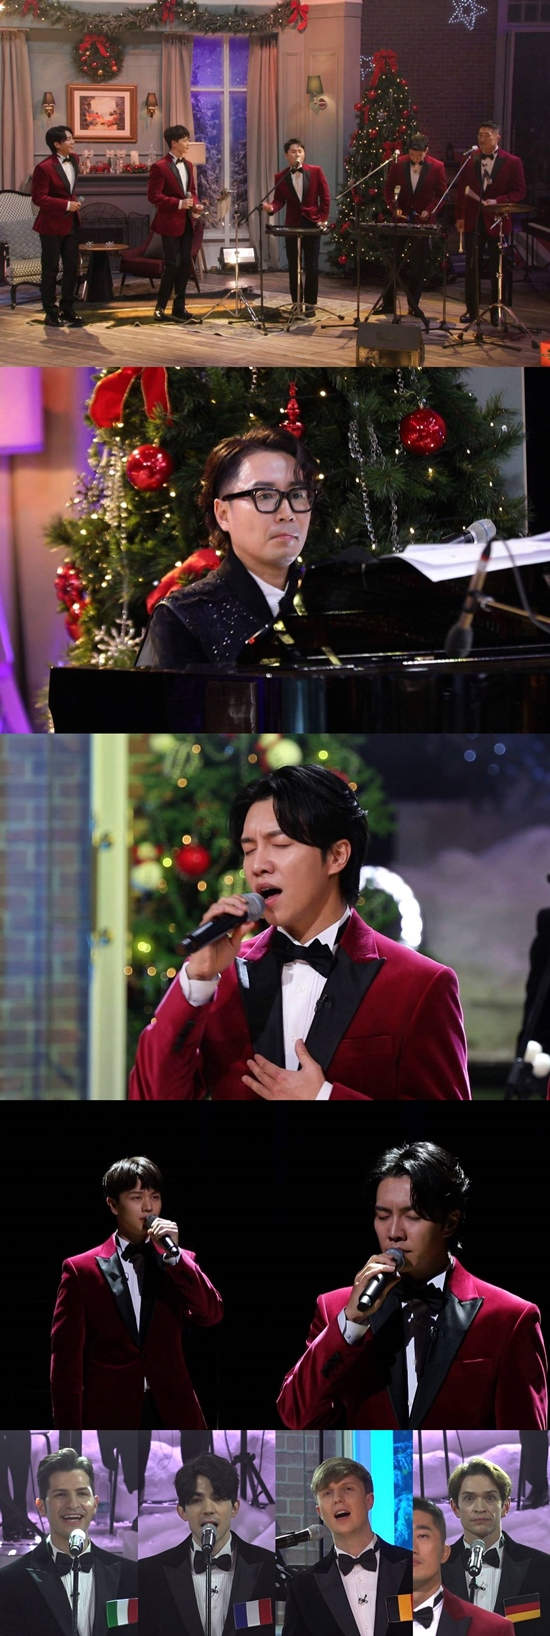 On the 26th SBS entertainment program All The Butlers, All The Butlers Official Christmas Fairy will be released with a heartwarming year-end stage with Master Jung Jae Hyung.Master Jung Jae Hyung formed the Empty Boys Choir to fill the hearts of those who had a hard time with Corona this year.On the day of the show, the members of All The Butlers and daily disciples Yook Sungjae, Alberto Mondi (Italy), Daniel Lindeman (Germany), Julian Quintart (Belgian), Robin Diana, and other foreign performers who are unable to go down to their hometowns and have to spend the end of the year alone in other countries, and the 18-member London Philharmonic Orchestra It will show a rich year-end performance with a childrens choir.The Bin Boy Choir will feature three songs, including France Chansong Non, Je Ne Regrette Rien and Holo Arirang, starting with the carol Last Christmas.In the most recording, the members and Yook Sungjae were engaged in practice by replaying the lyrics until just before they came to the stage for a successful performance.When Lee Seung-gi entered the show, Lee added tension to the stage with heavy vocals, and Yook Sungjae overwhelmed the crowd with explosive singing power and heated the scene.In addition, it is the back door that the piano performance of Master Jung Jae Hyung, the colorful London Philharmonic Orchestra, and the pure voice of the childrens choir were added to make the scene into a tearful sea.It aired at 6:30 p.m. on the 26th.